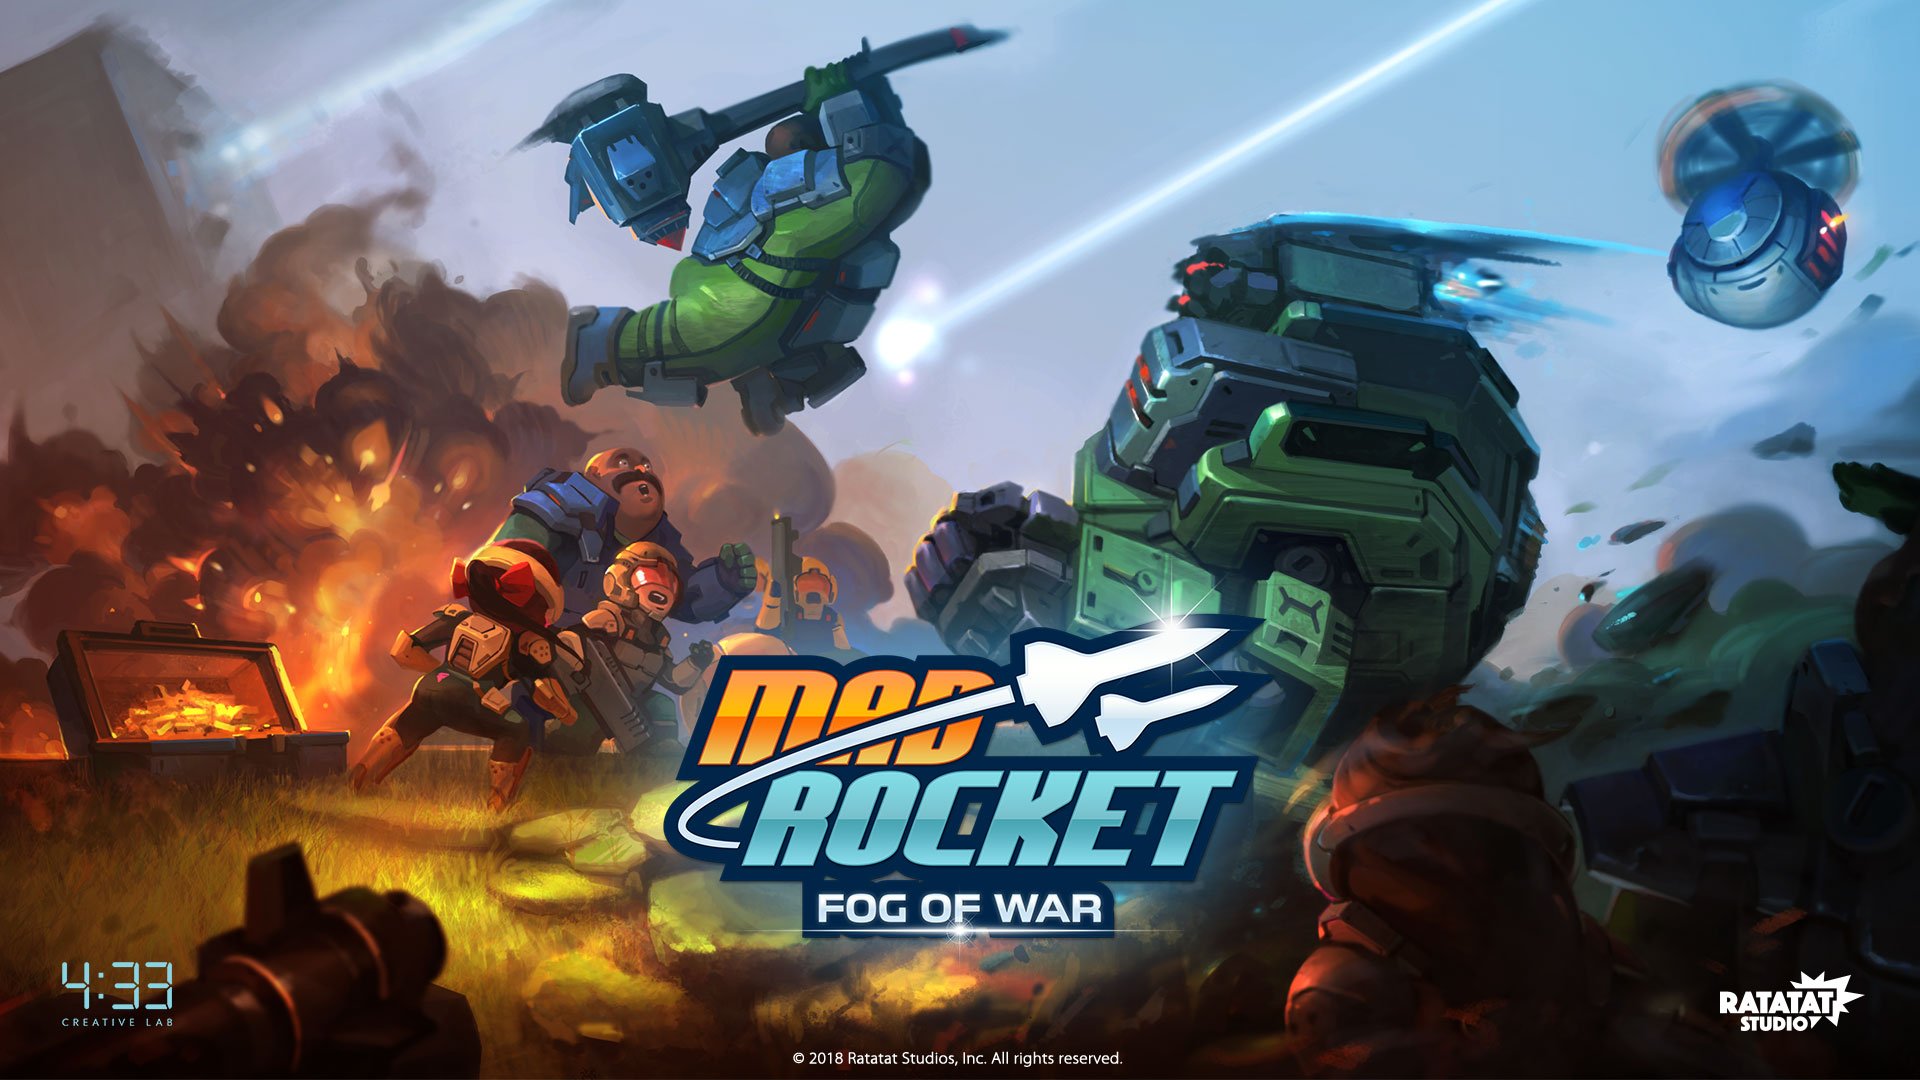 Mad Rocket: Fog of War is out now on iOS and Android